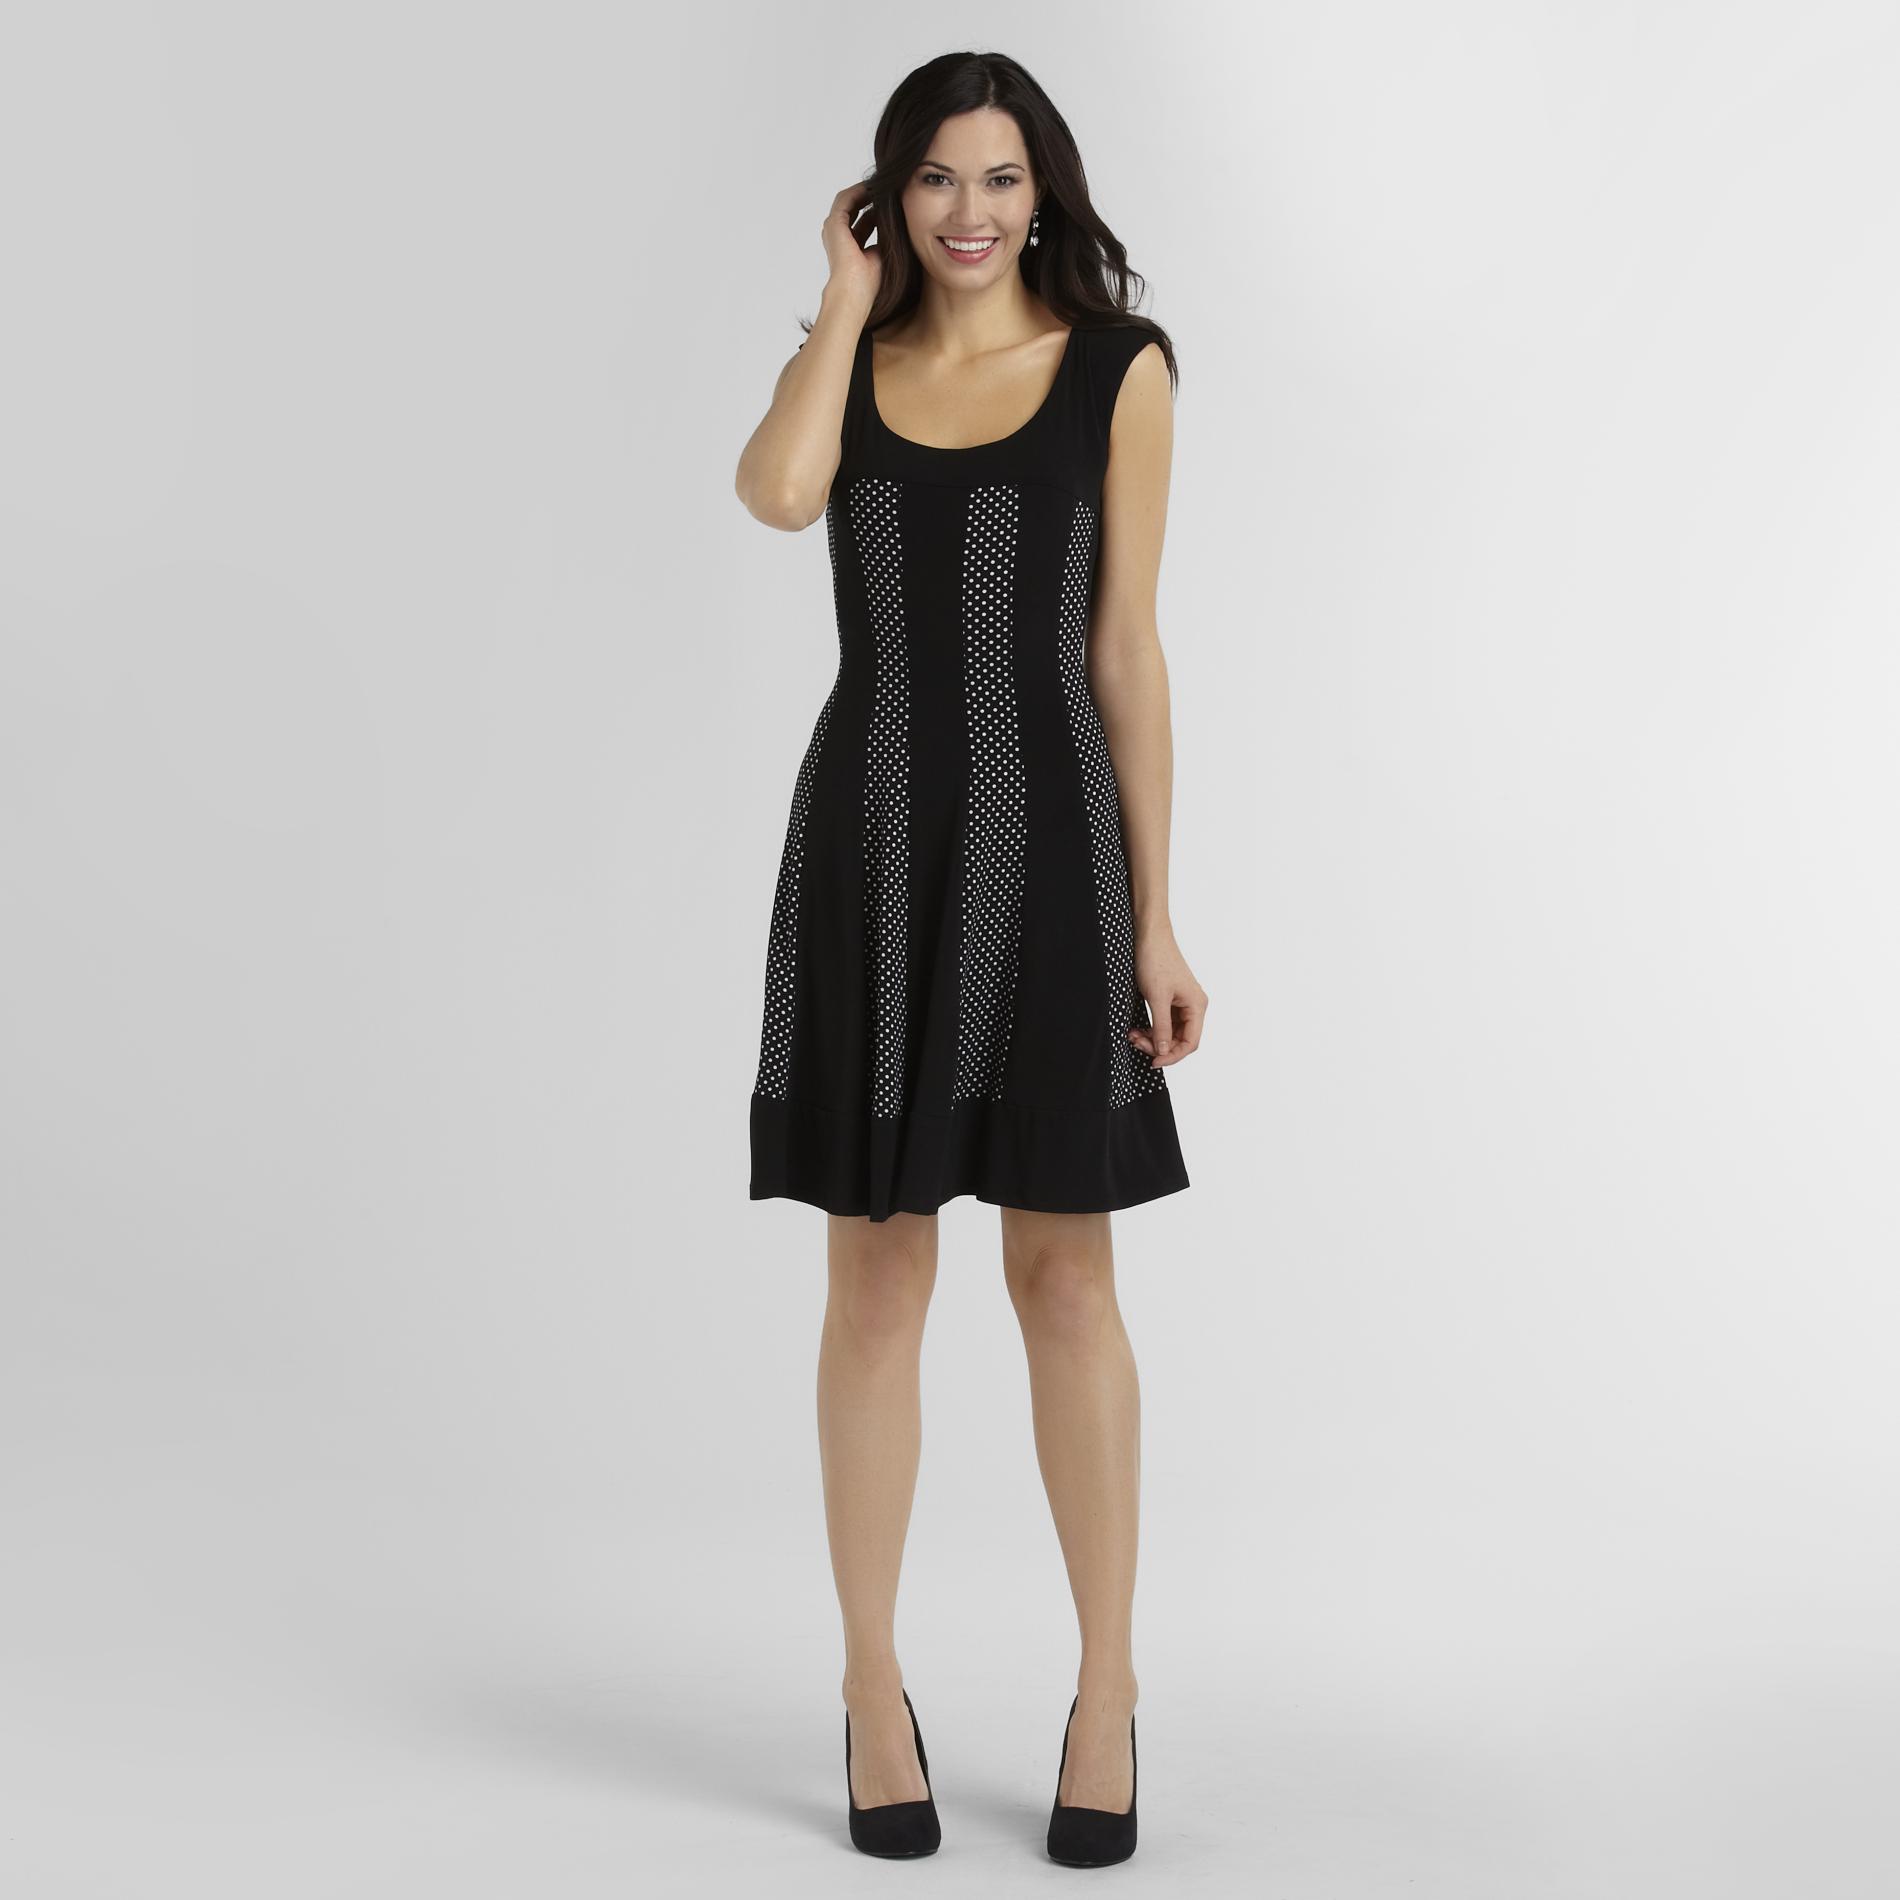 Connected Apparel Women's Sleeveless Party Dress Black 10